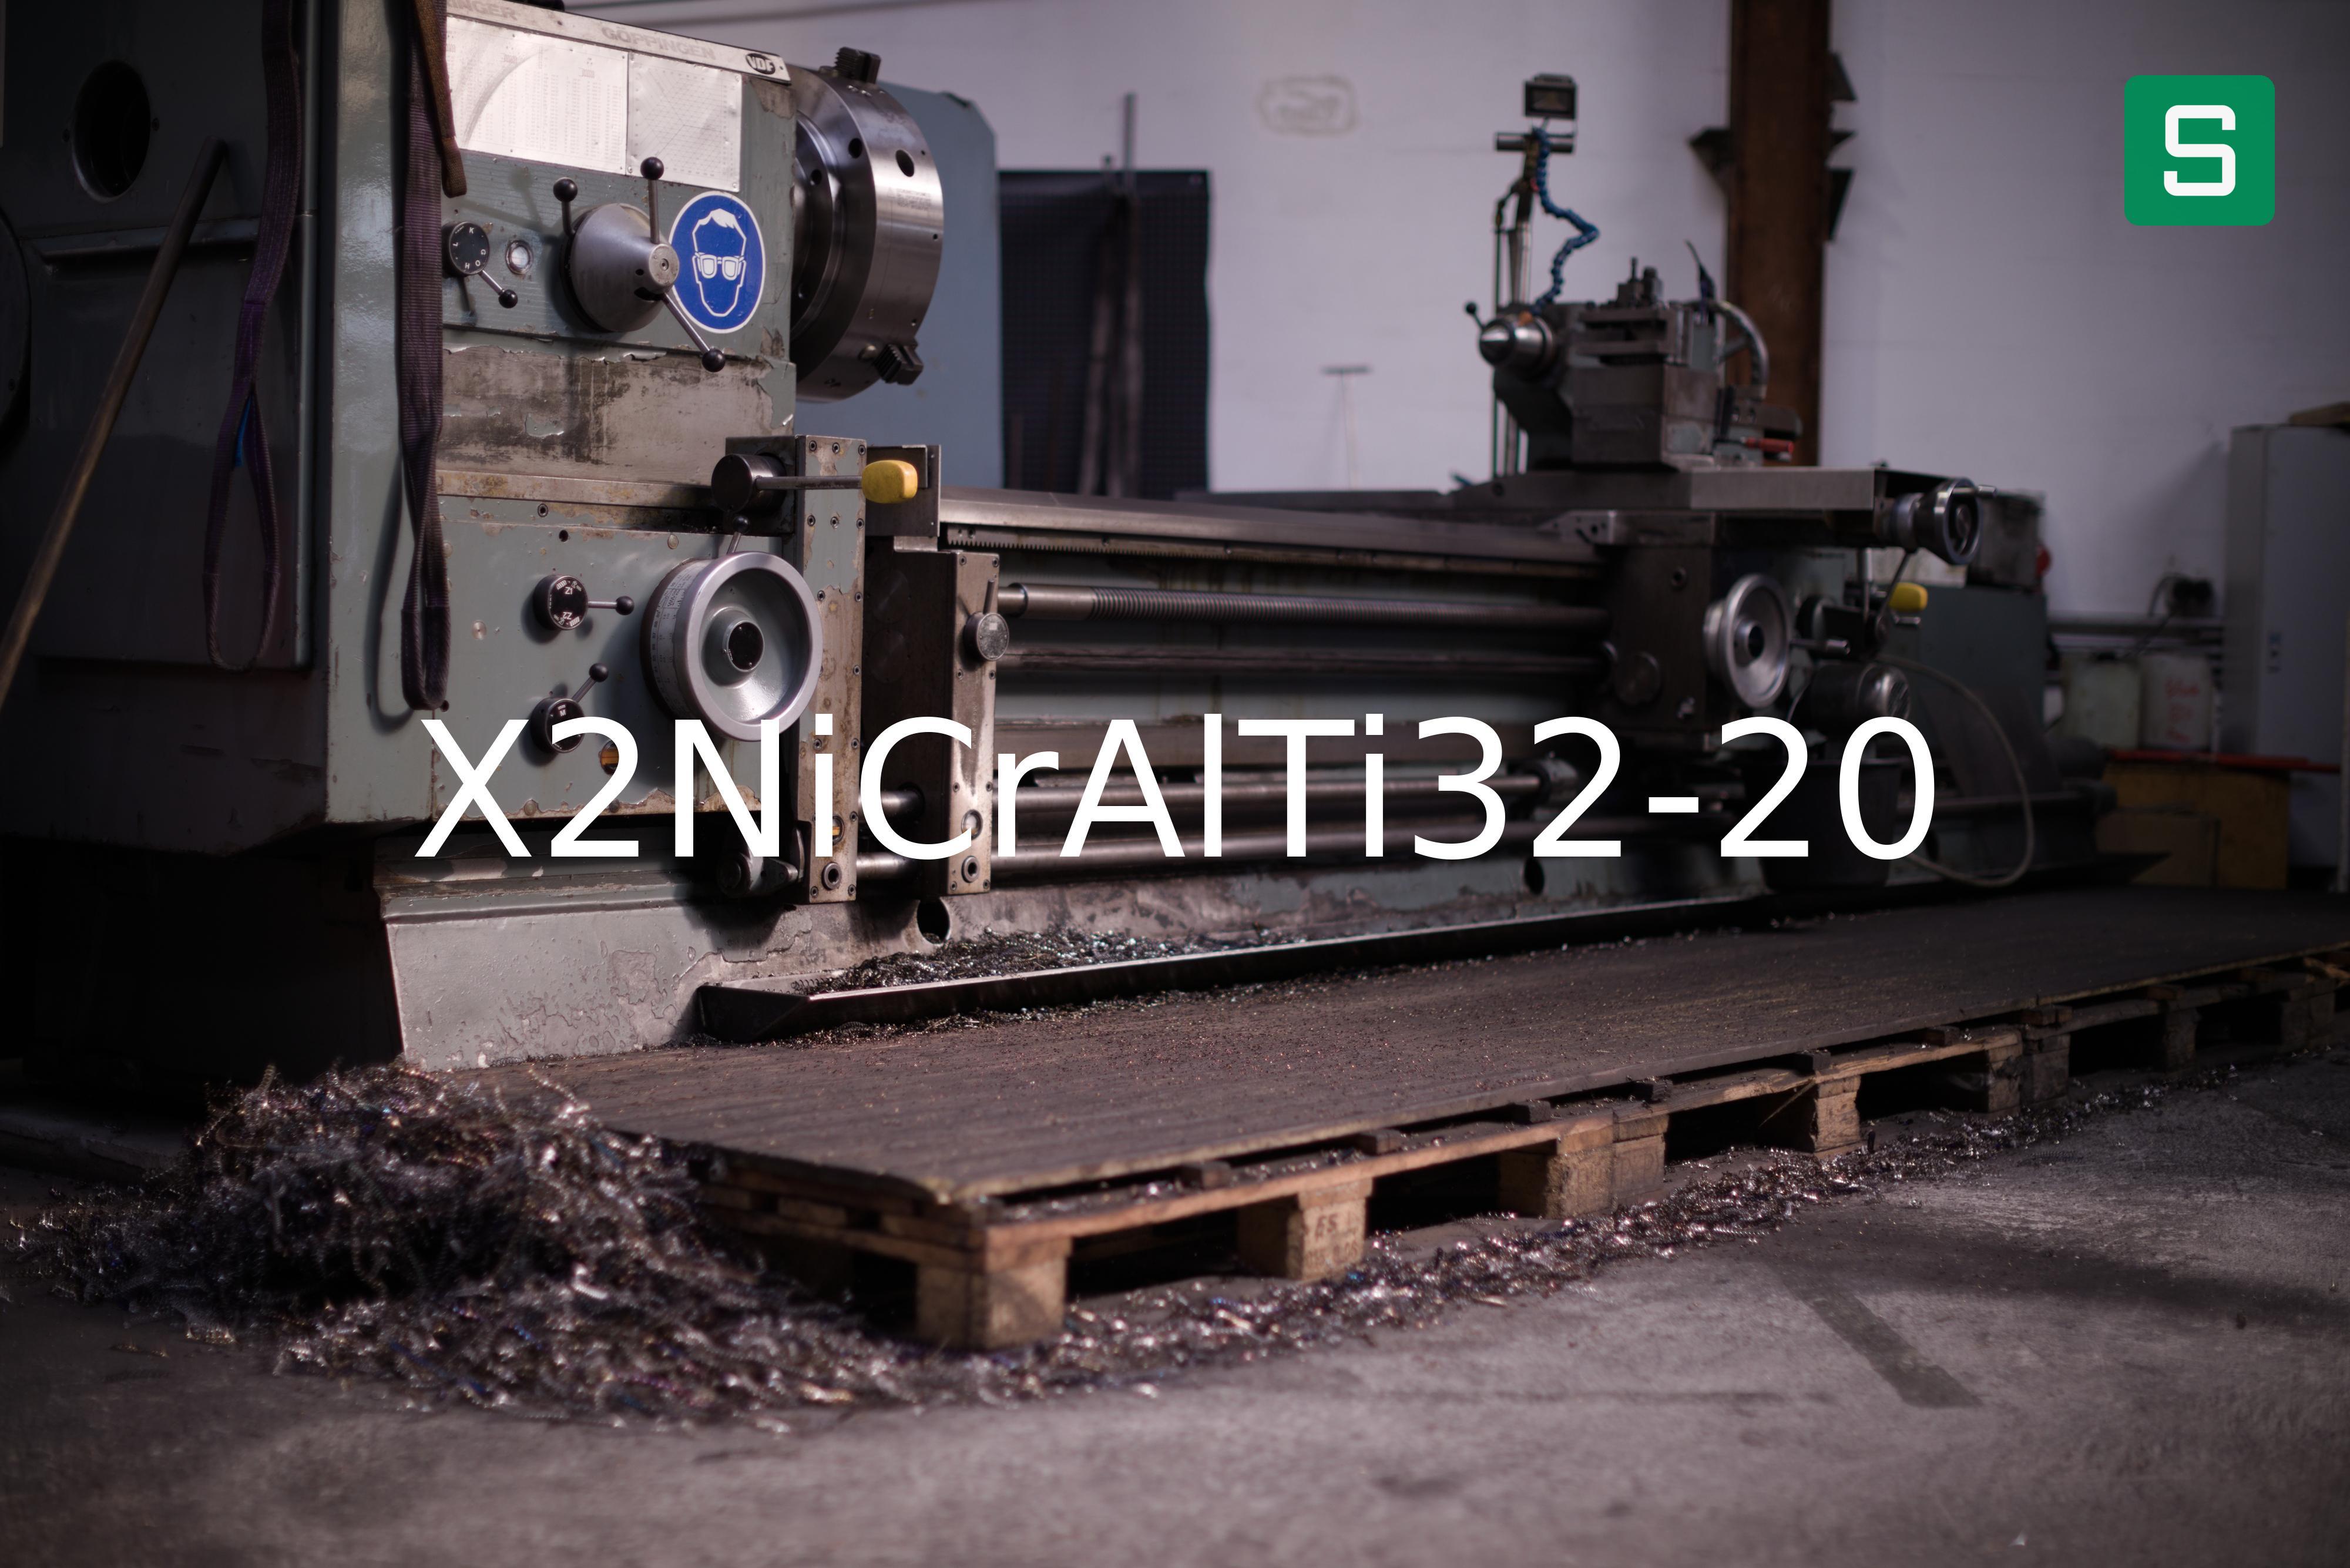 Steel Material: X2NiCrAlTi32-20